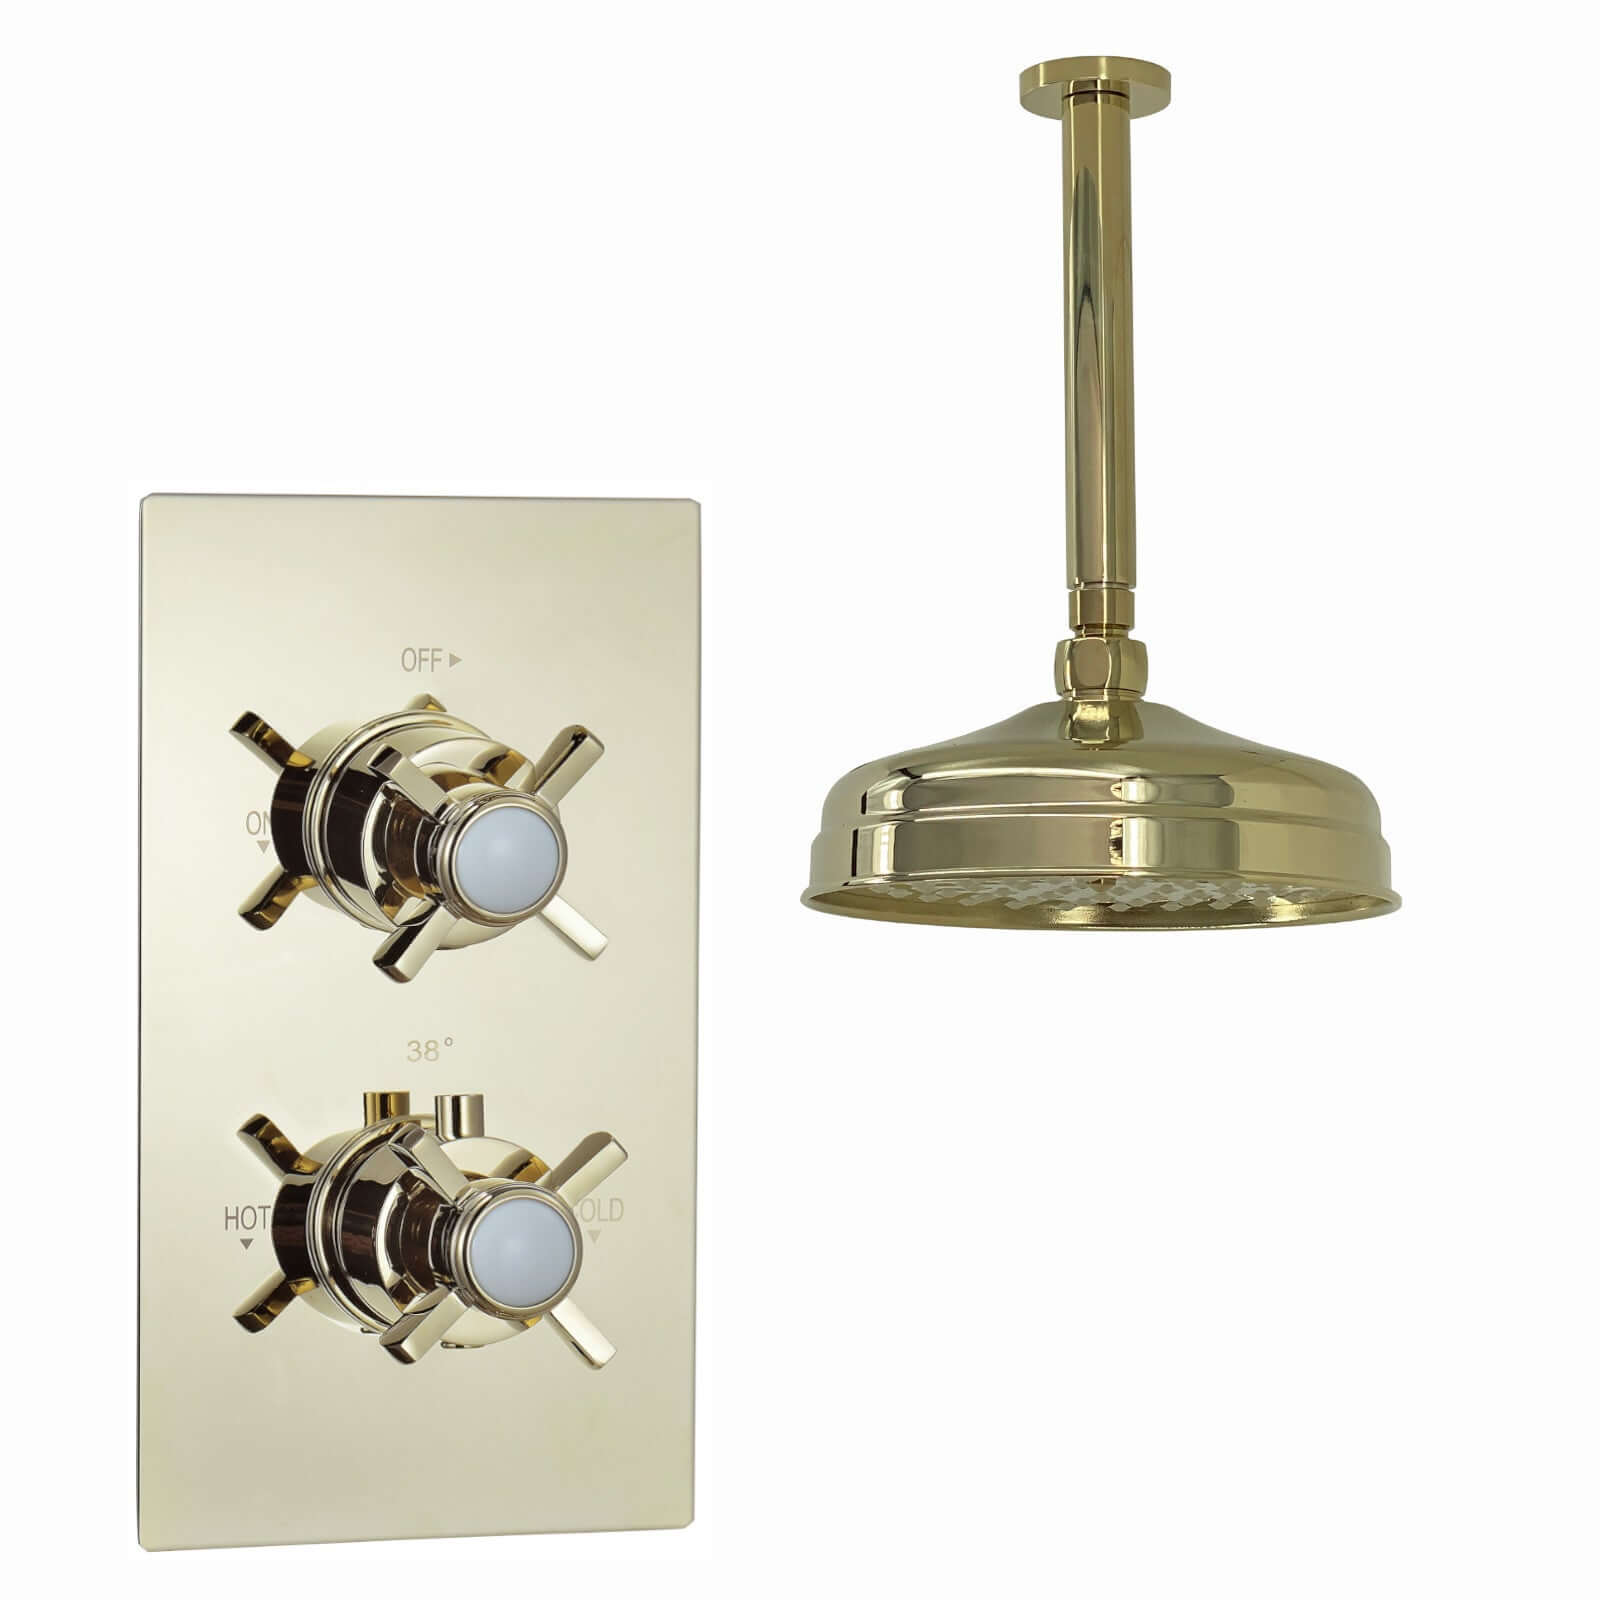 SH0261-01-edward-traditional-crosshead-and-white-details-concealed-thermostatic-shower-set-ceiling-fixed-8-shower-head-english-gold-1-outlet